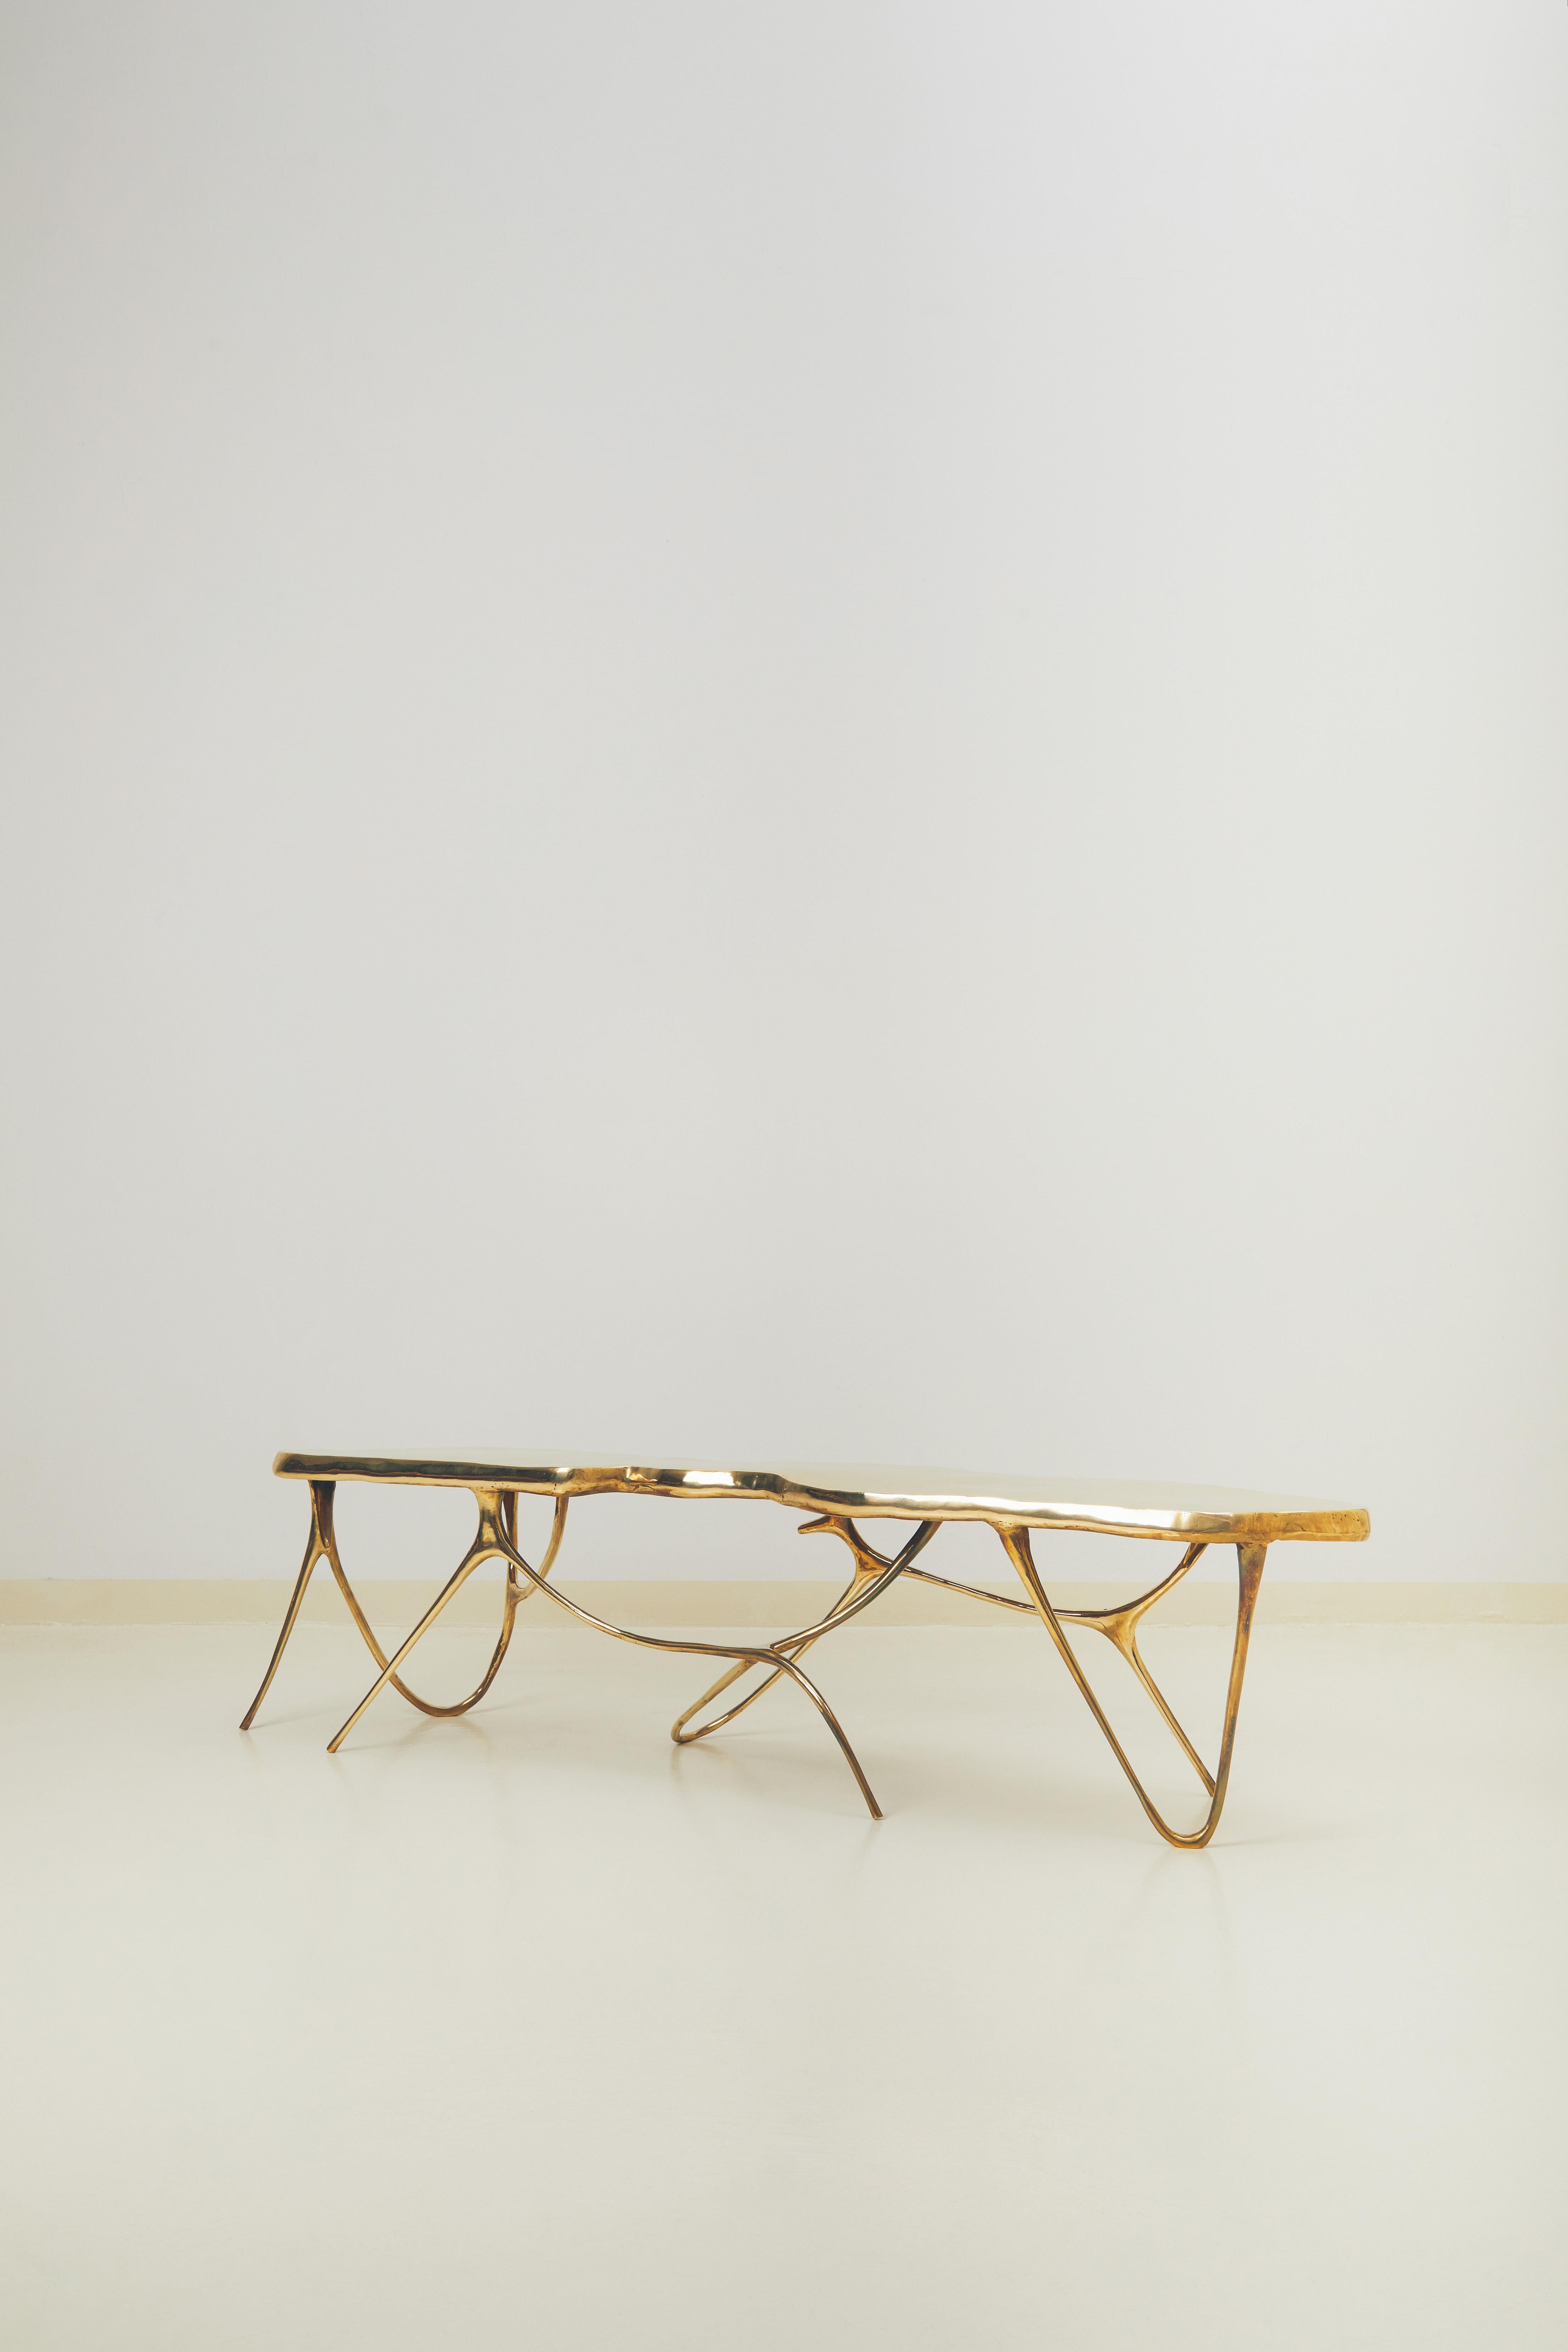 Calligraphic sculpted brass bench by Misaya.
Dimensions: W 158 x L 38 x H 40 cm
Materials: Brass.

Hand-sculpted brass bench.

Misaya emulates Chinese ink paintings through the process of lost-wax casting.

Each piece in the Ink collection, which